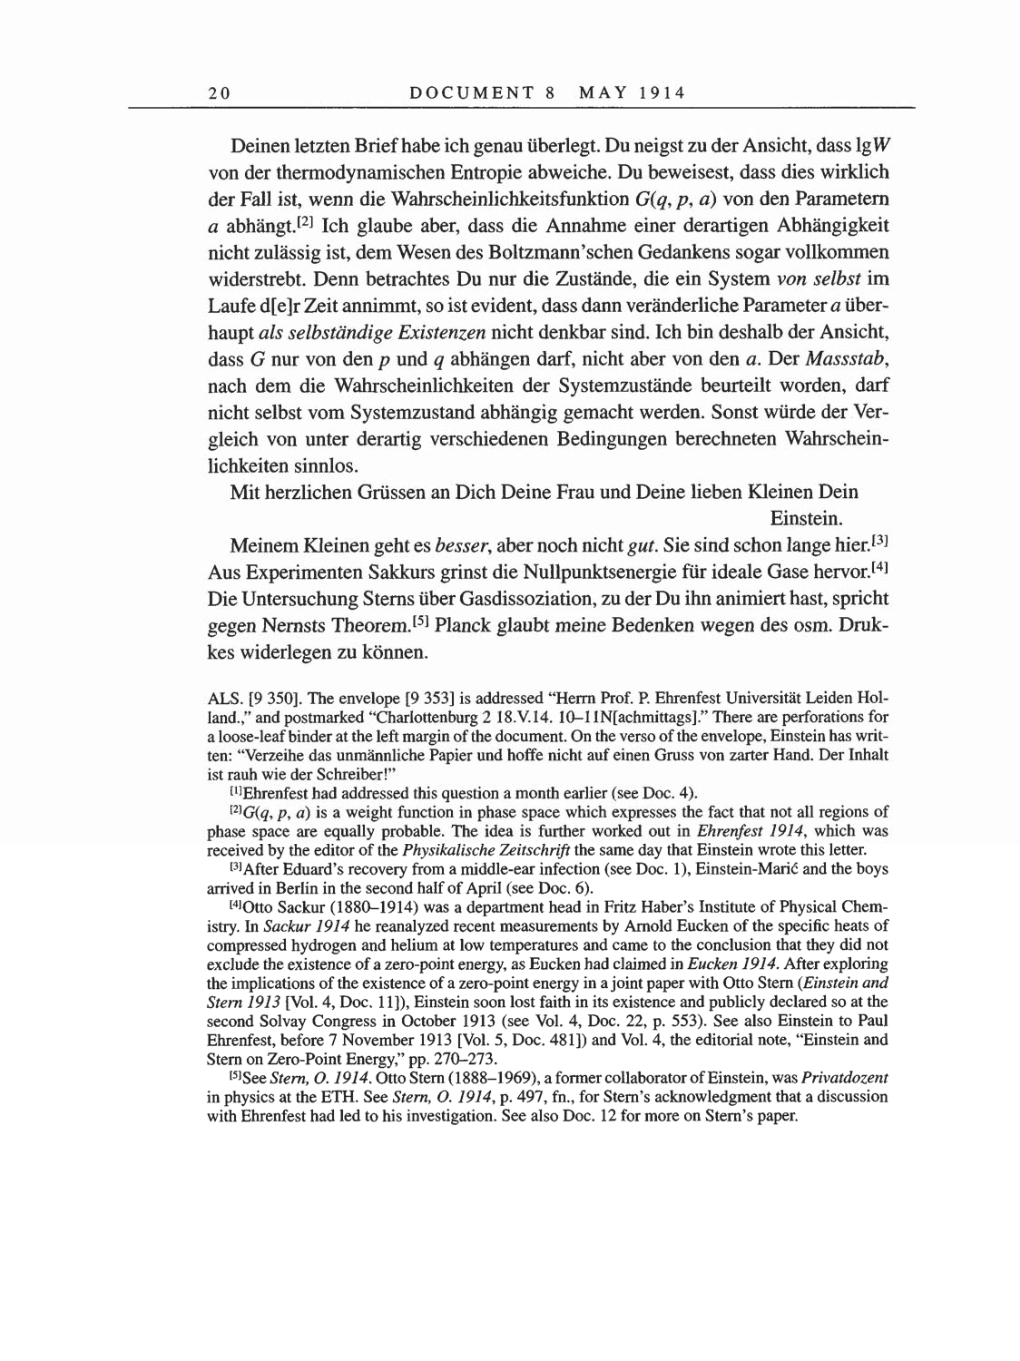 Volume 8, Part A: The Berlin Years: Correspondence 1914-1917 page 20